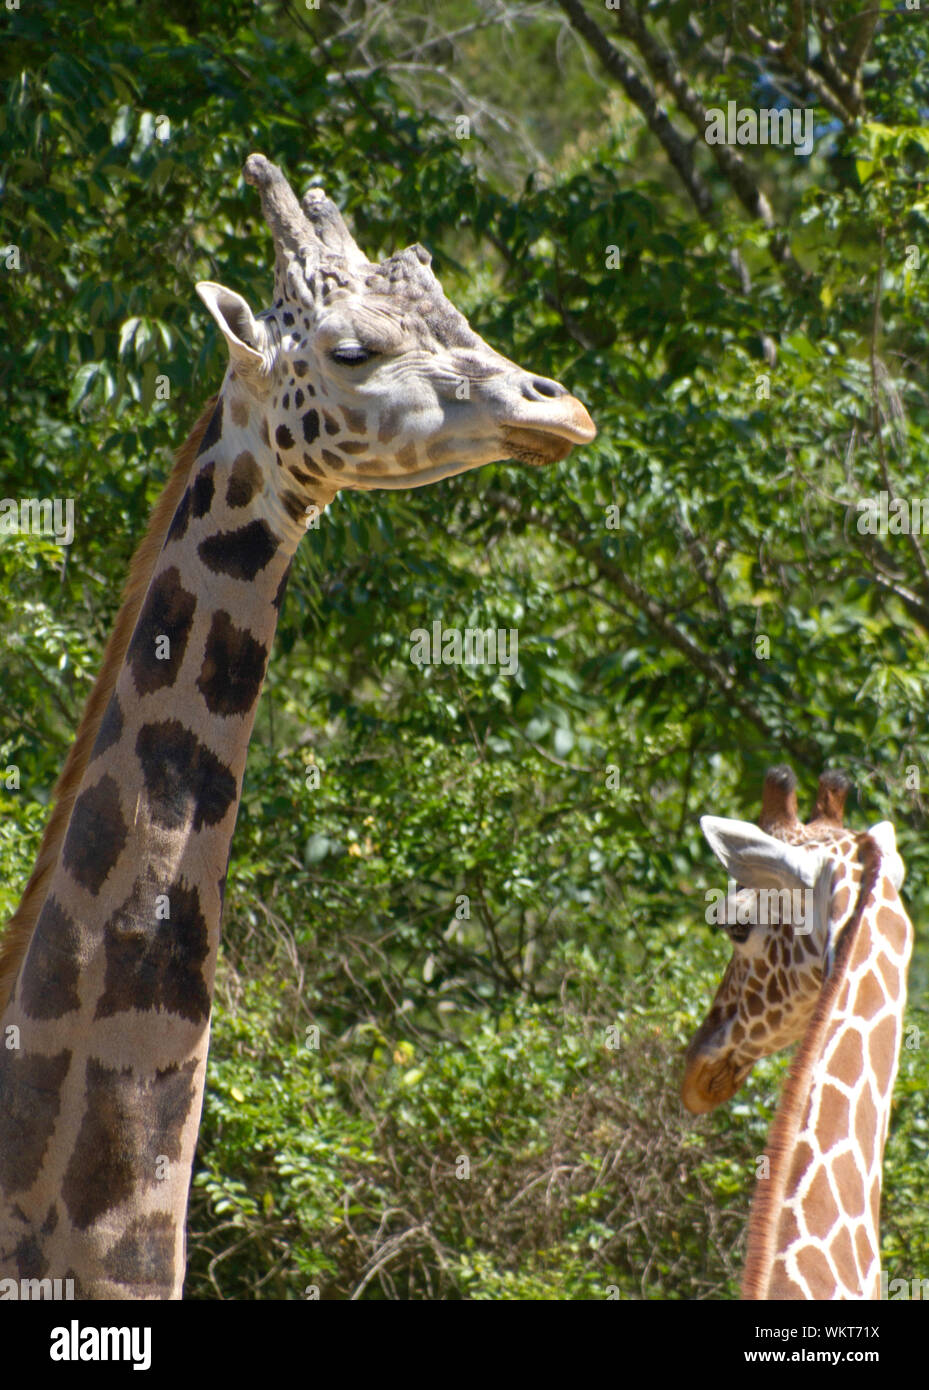 Close up of two long necked giraffes and their expressive faces under some trees on a sunny summer day Stock Photo